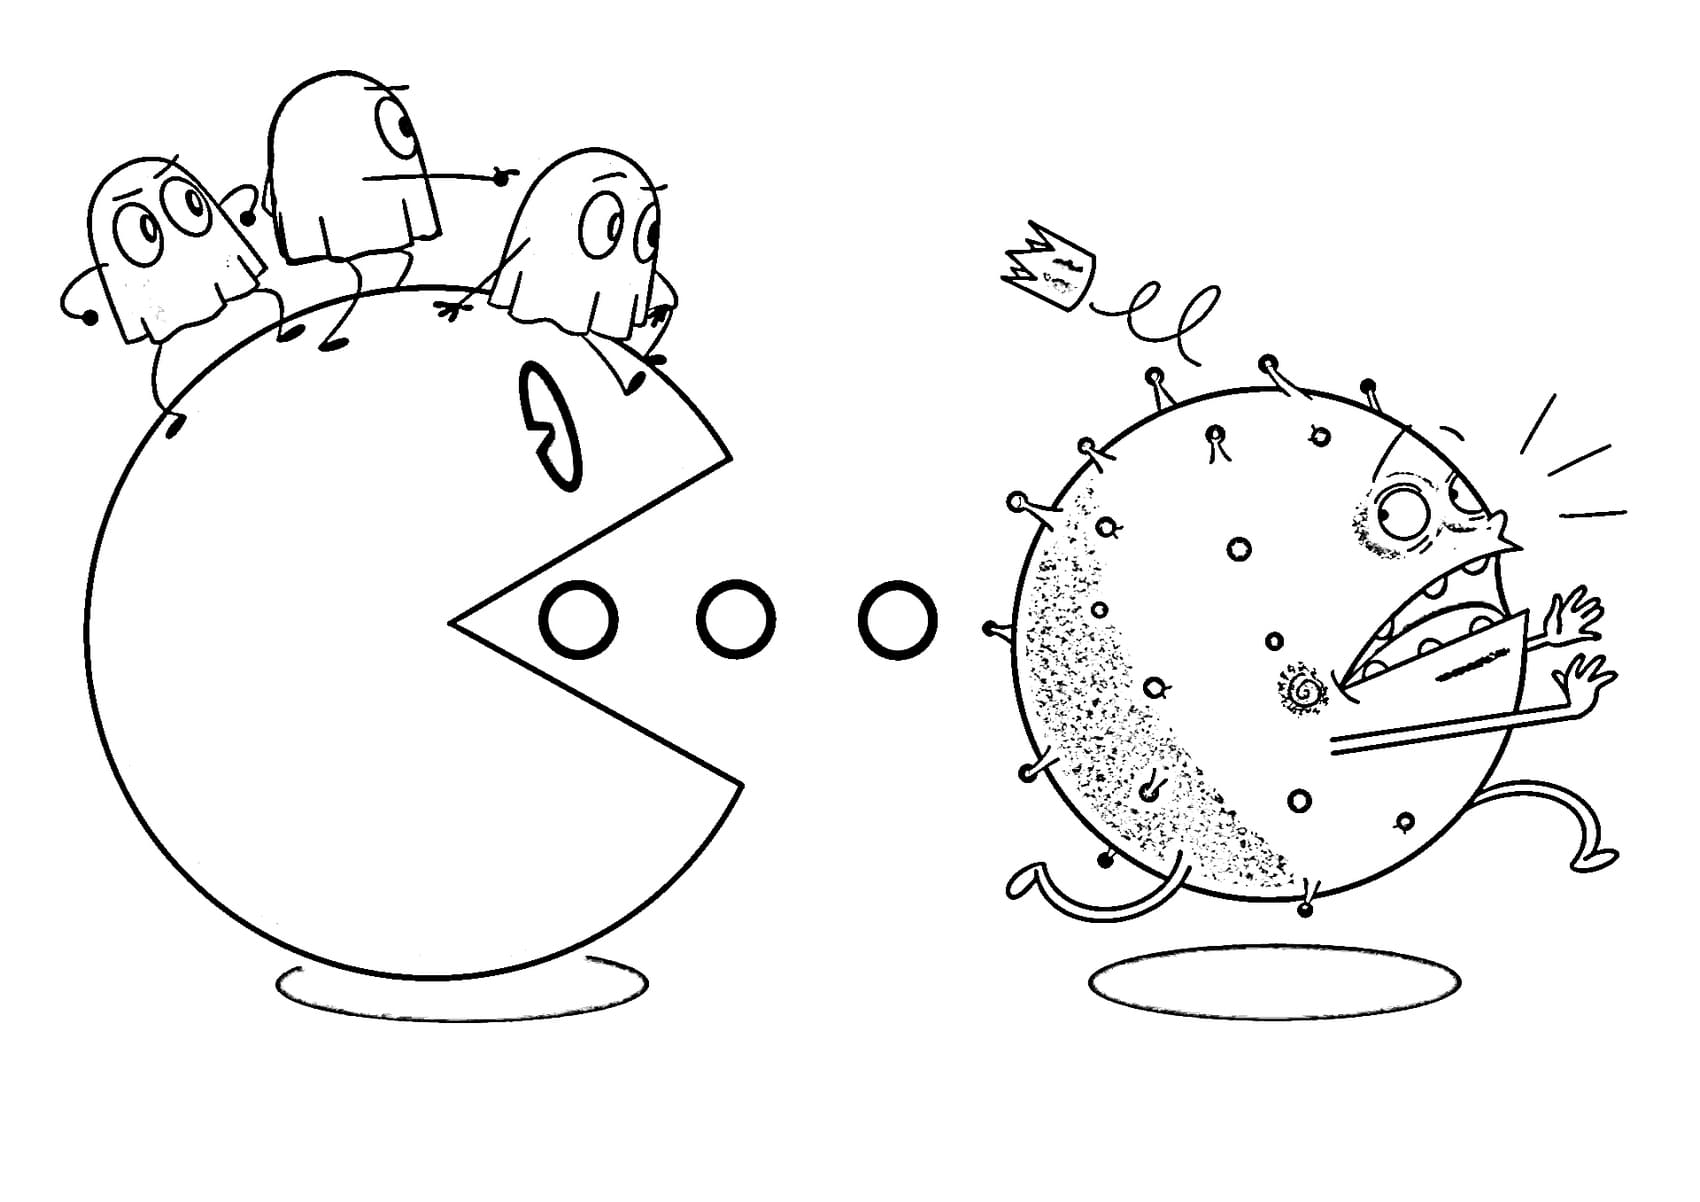 Pac man coloring pages best printable coloring pages